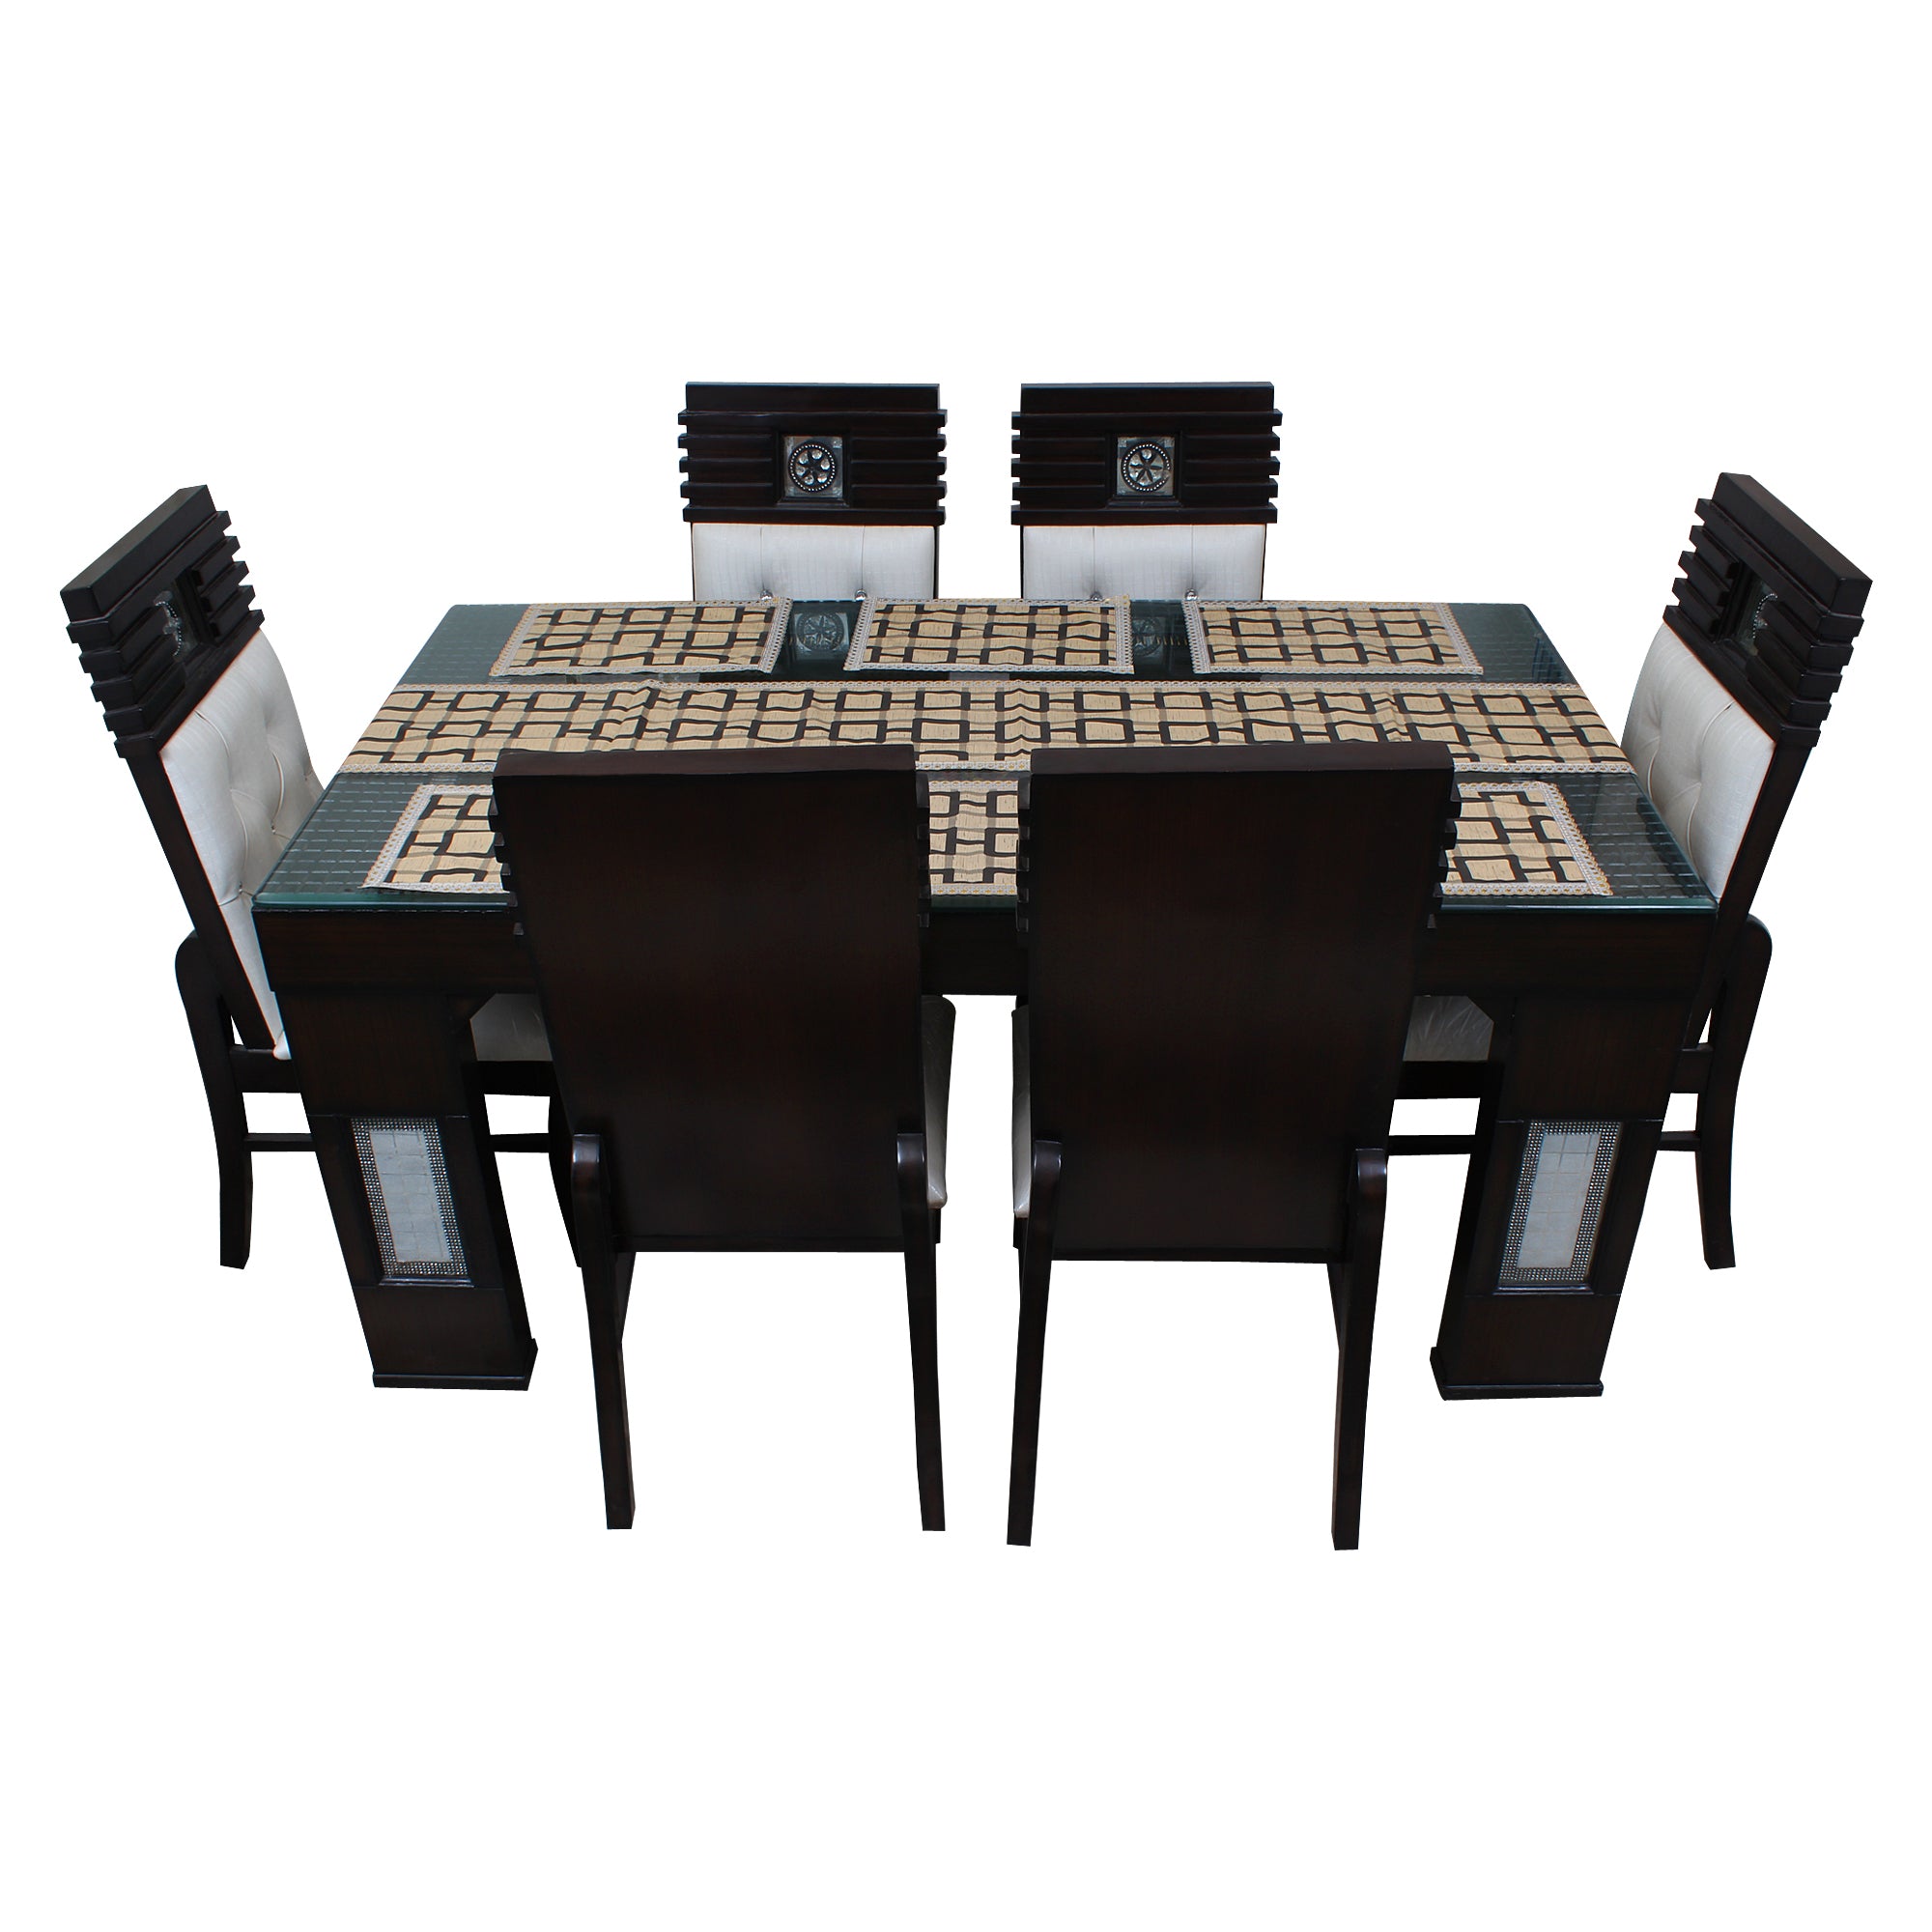 Waterproof & Dustproof Dining Table Runner With 6 Placemats, SA12 - Dream Care Furnishings Private Limited